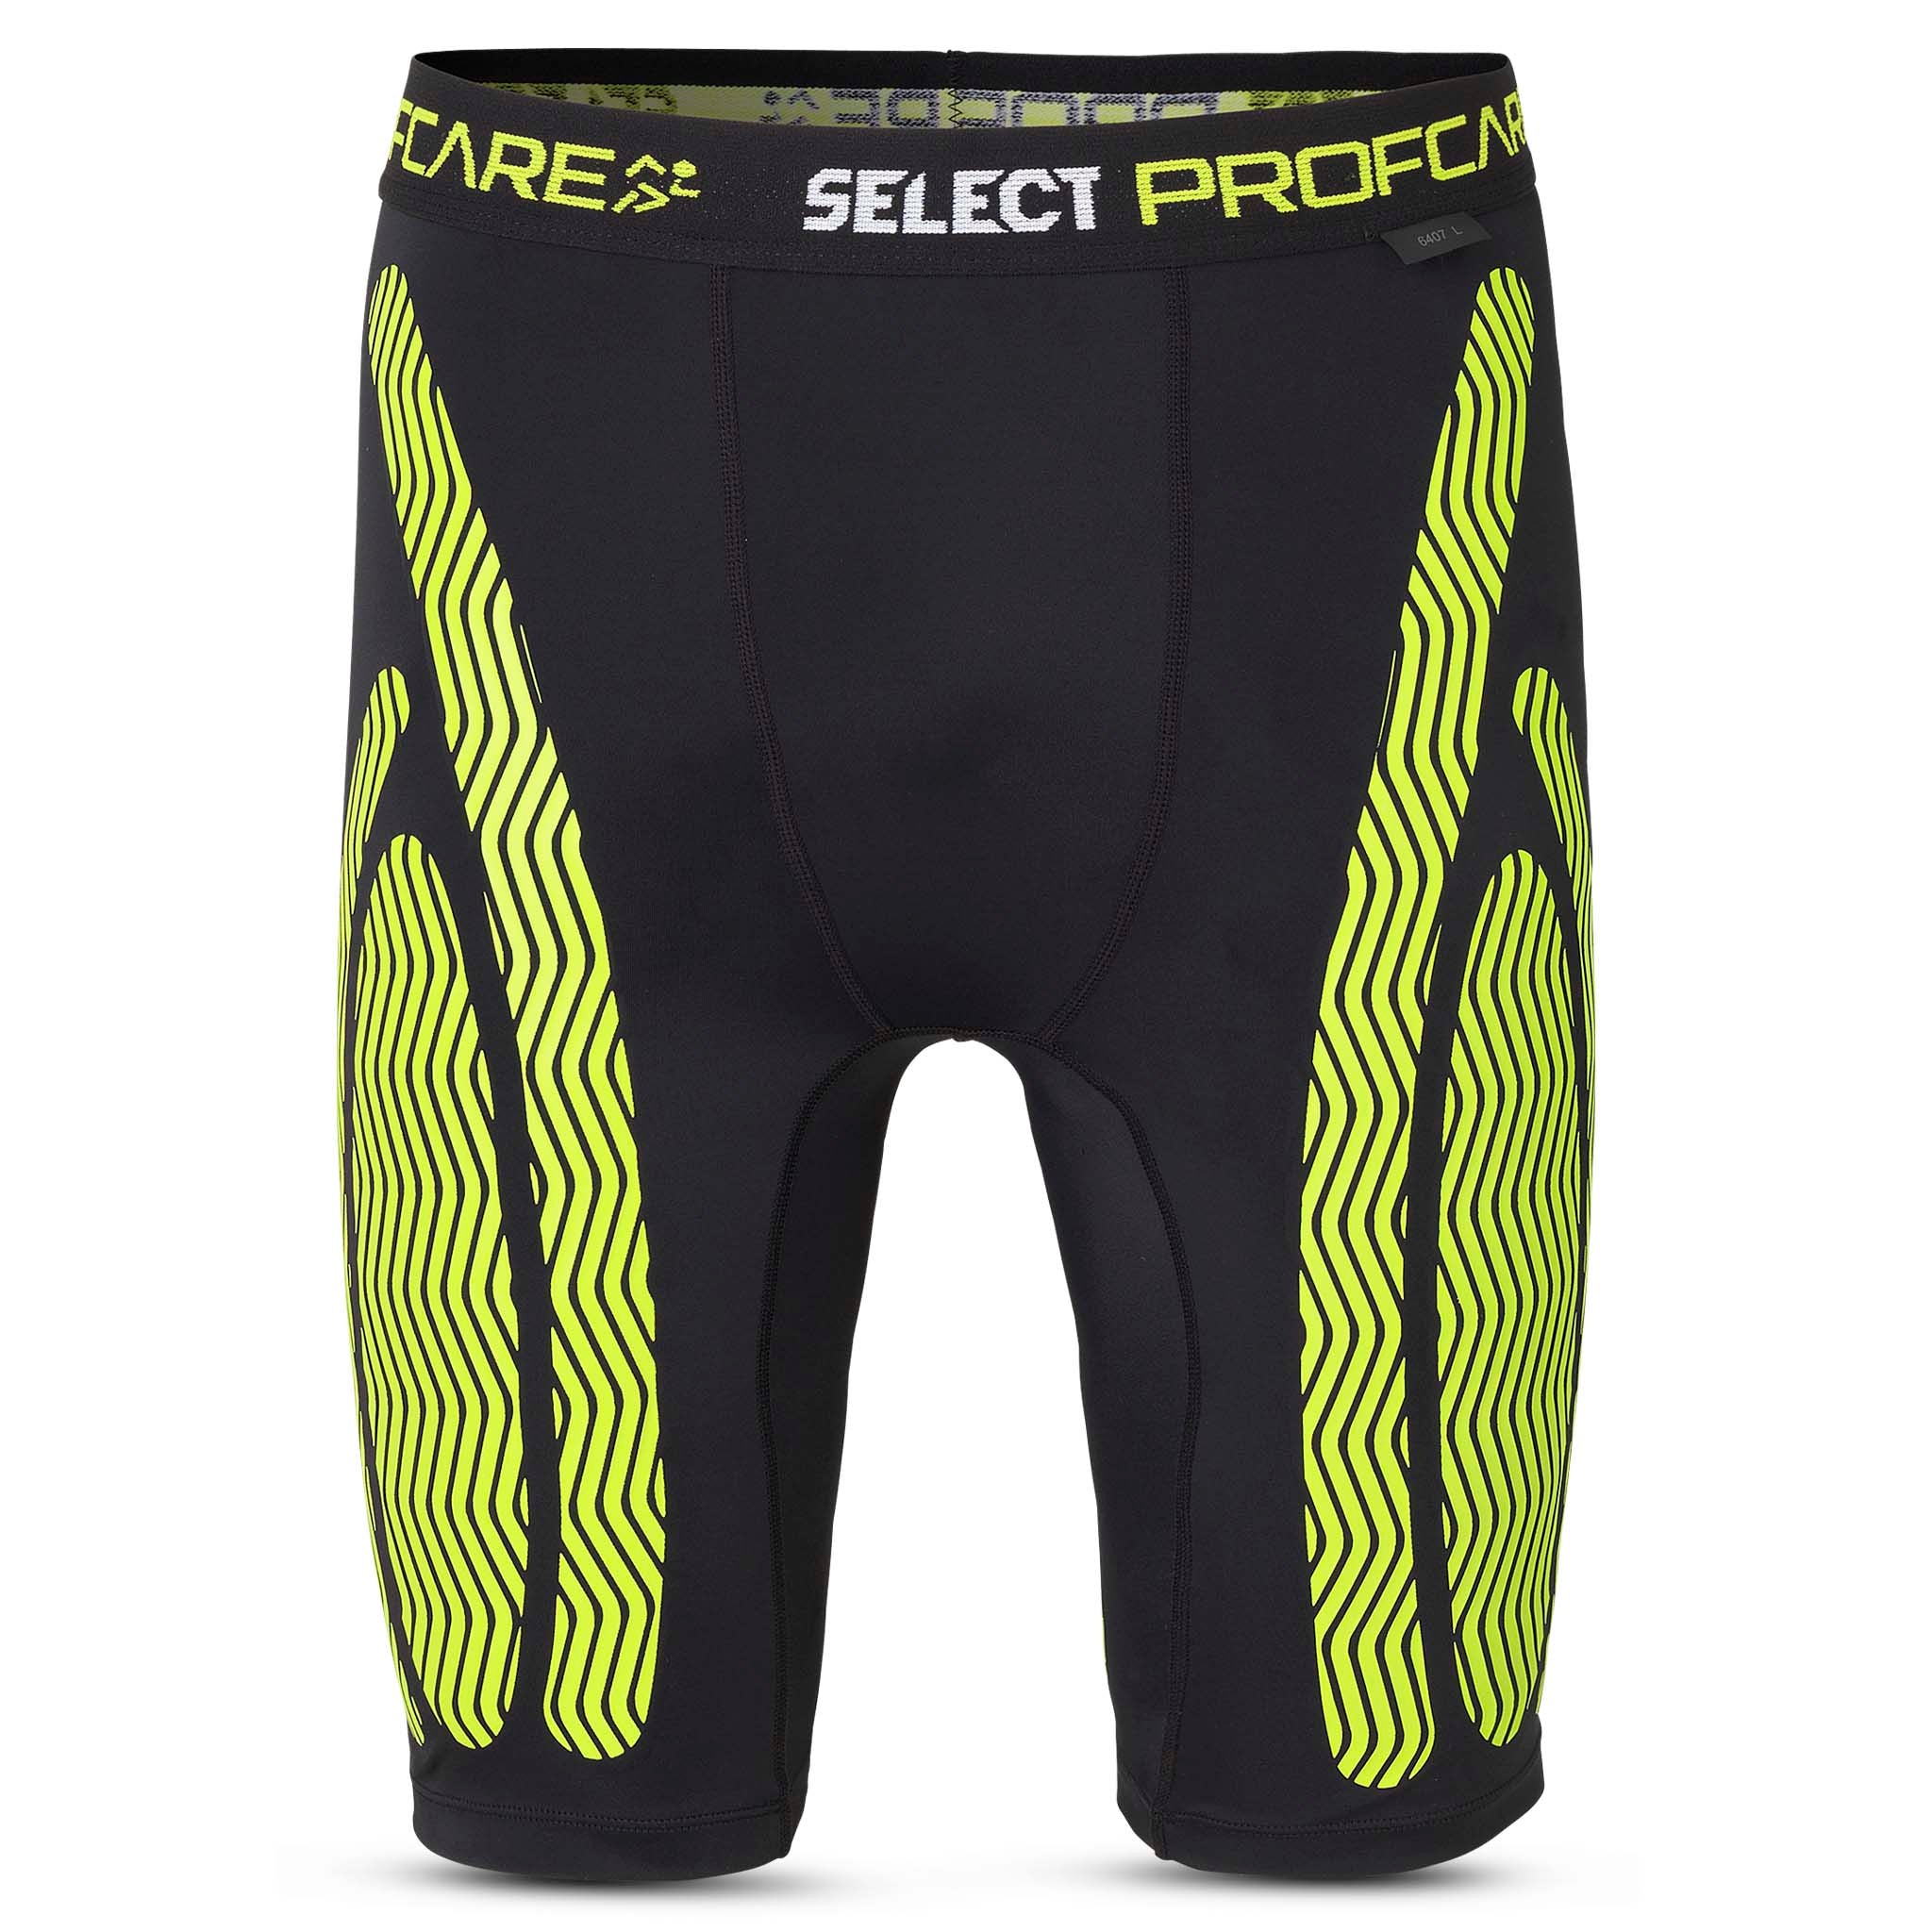 Youth Size USA Classic Bike Shorts  Padded Compression Shorts for Kids